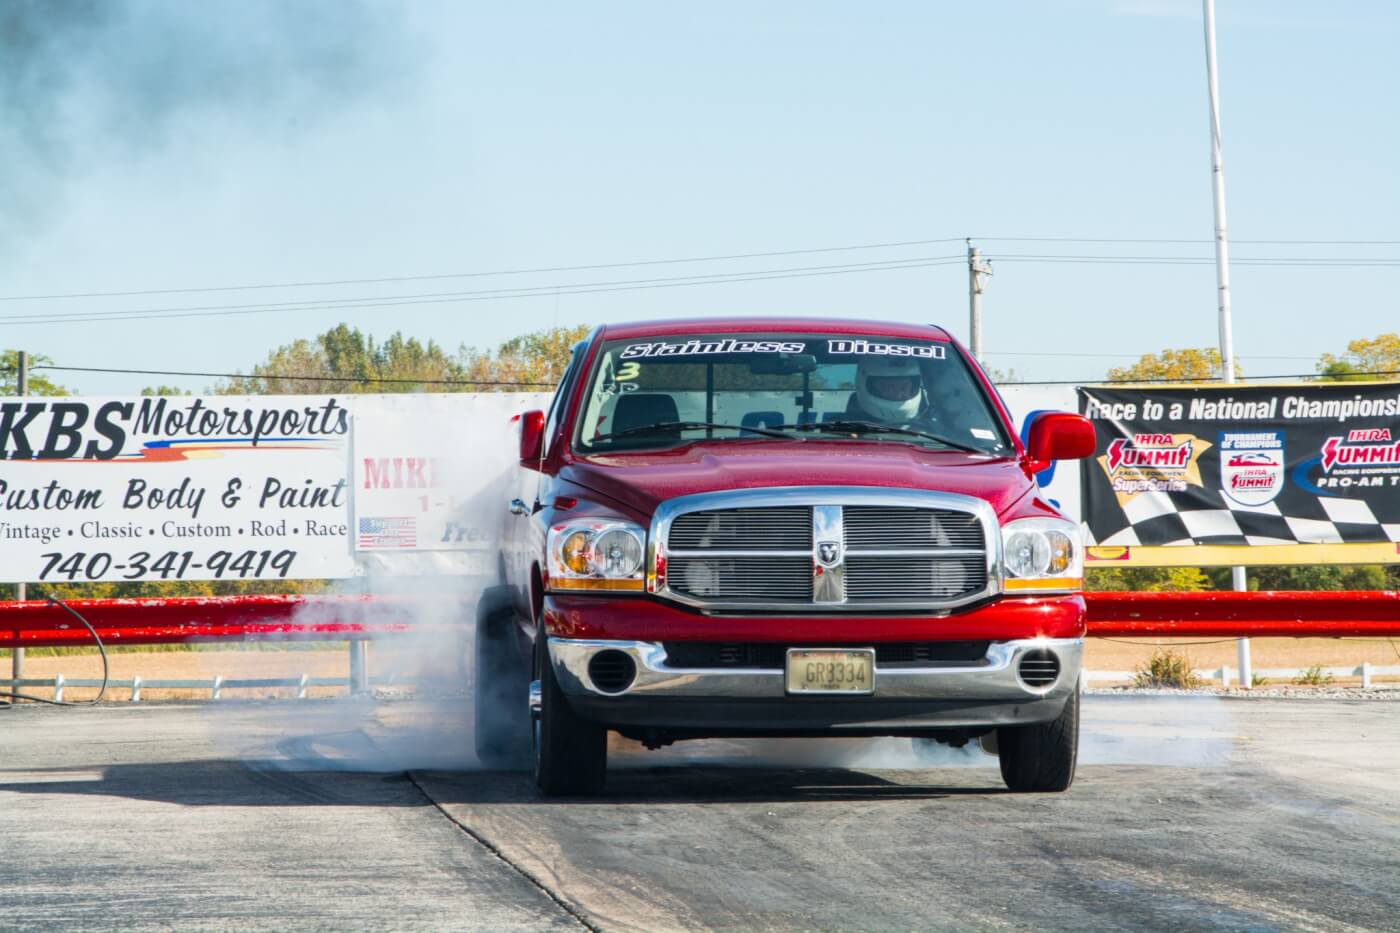 Jim “Lucky Dog” Layden placed second in the Quick Diesel class with his bright red Dodge. He turned in a 12.51 ET at 115.37 mph. 